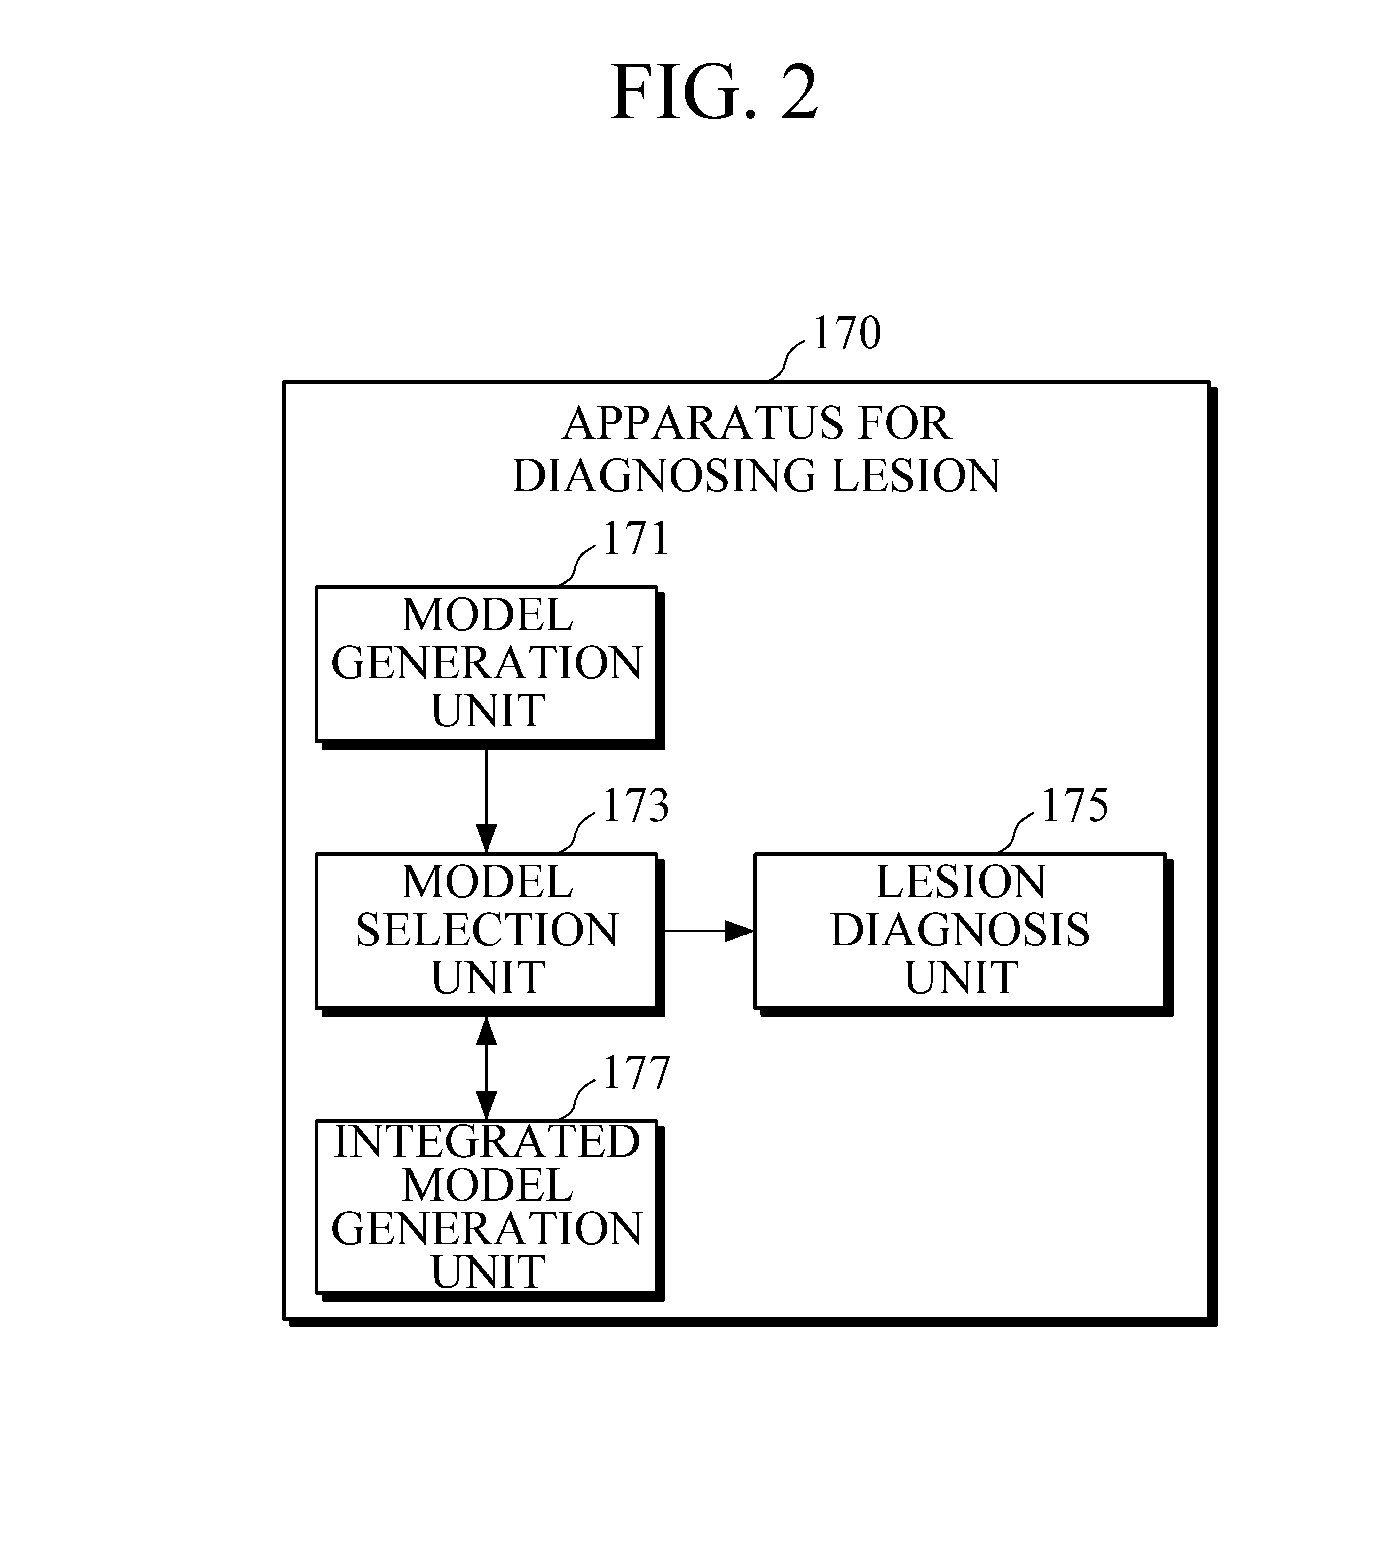 Apparatus and method of diagnosis using diagnostic models